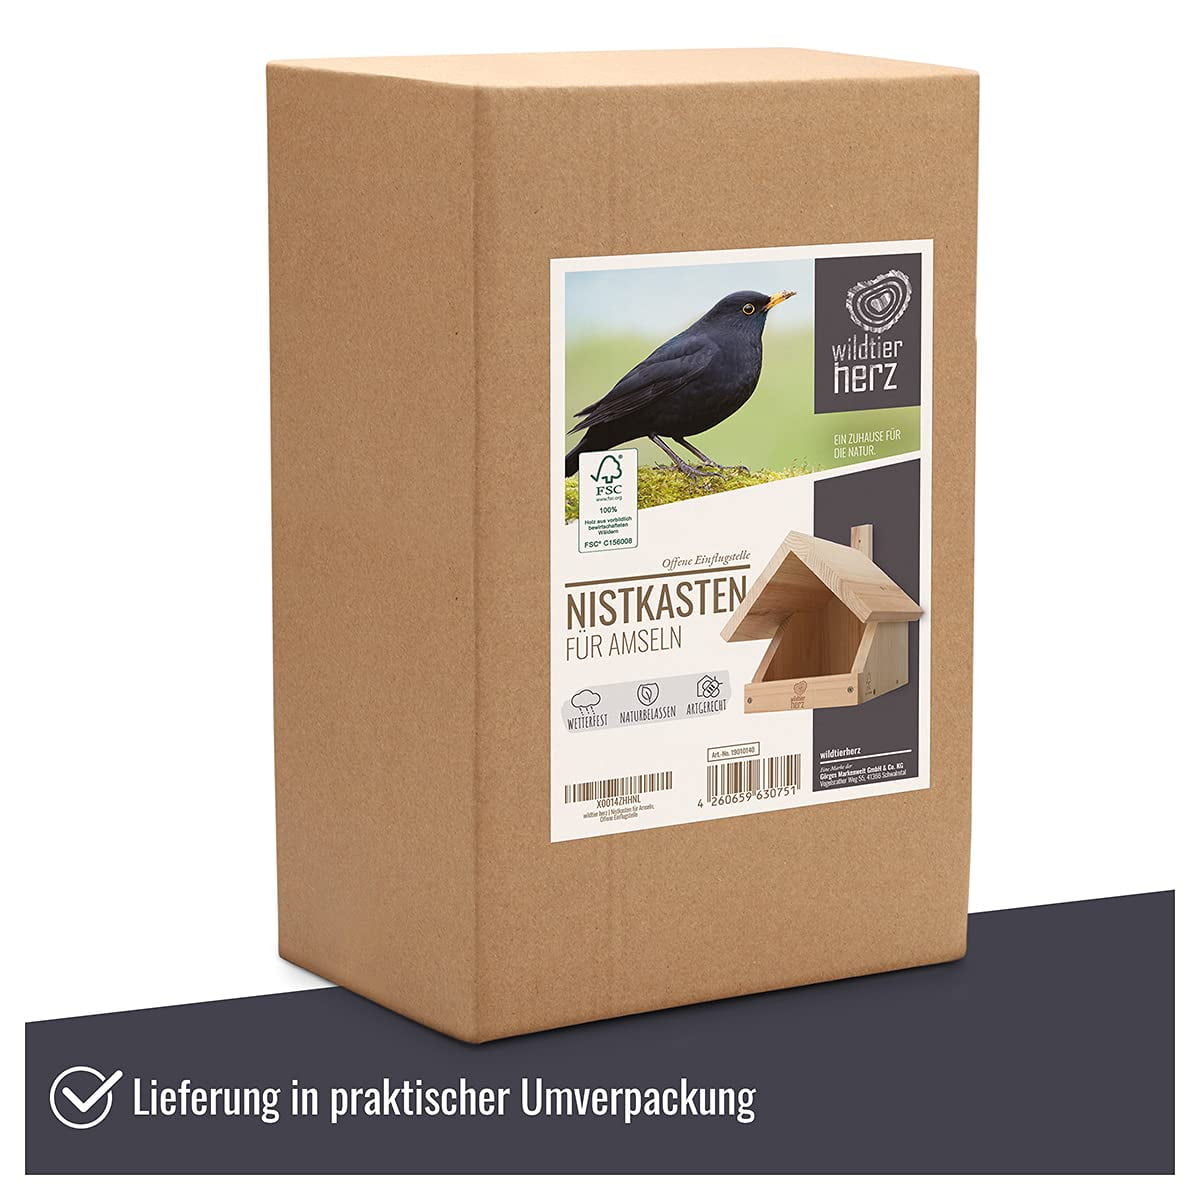 wildtier herz I Blackbird nest Box Made of Screwed Solid Wood - 10 x 11.5 x 11 in, Weatherproof & untreated, Aviary for Half-cave Breeders, Half-cave for Blackbirds, Robins & Co.